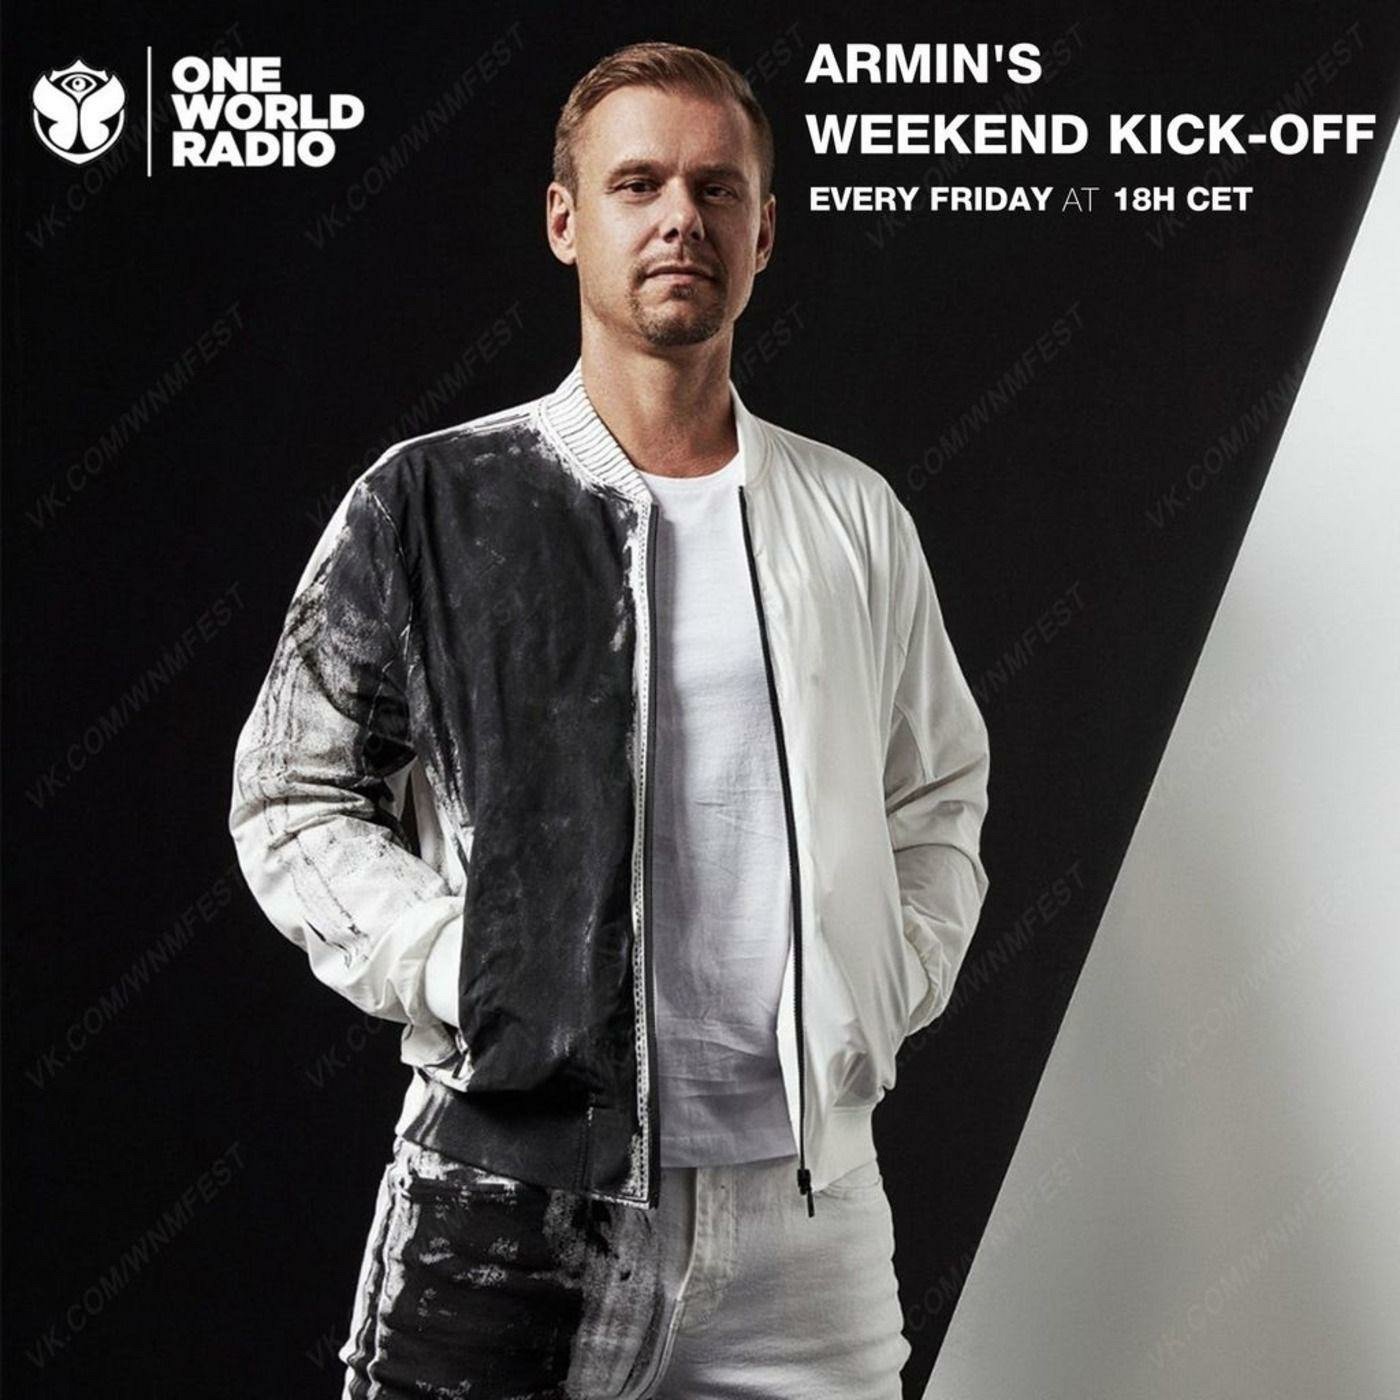 Armin's Weekend Kick-Off 191 - March 10, 2023